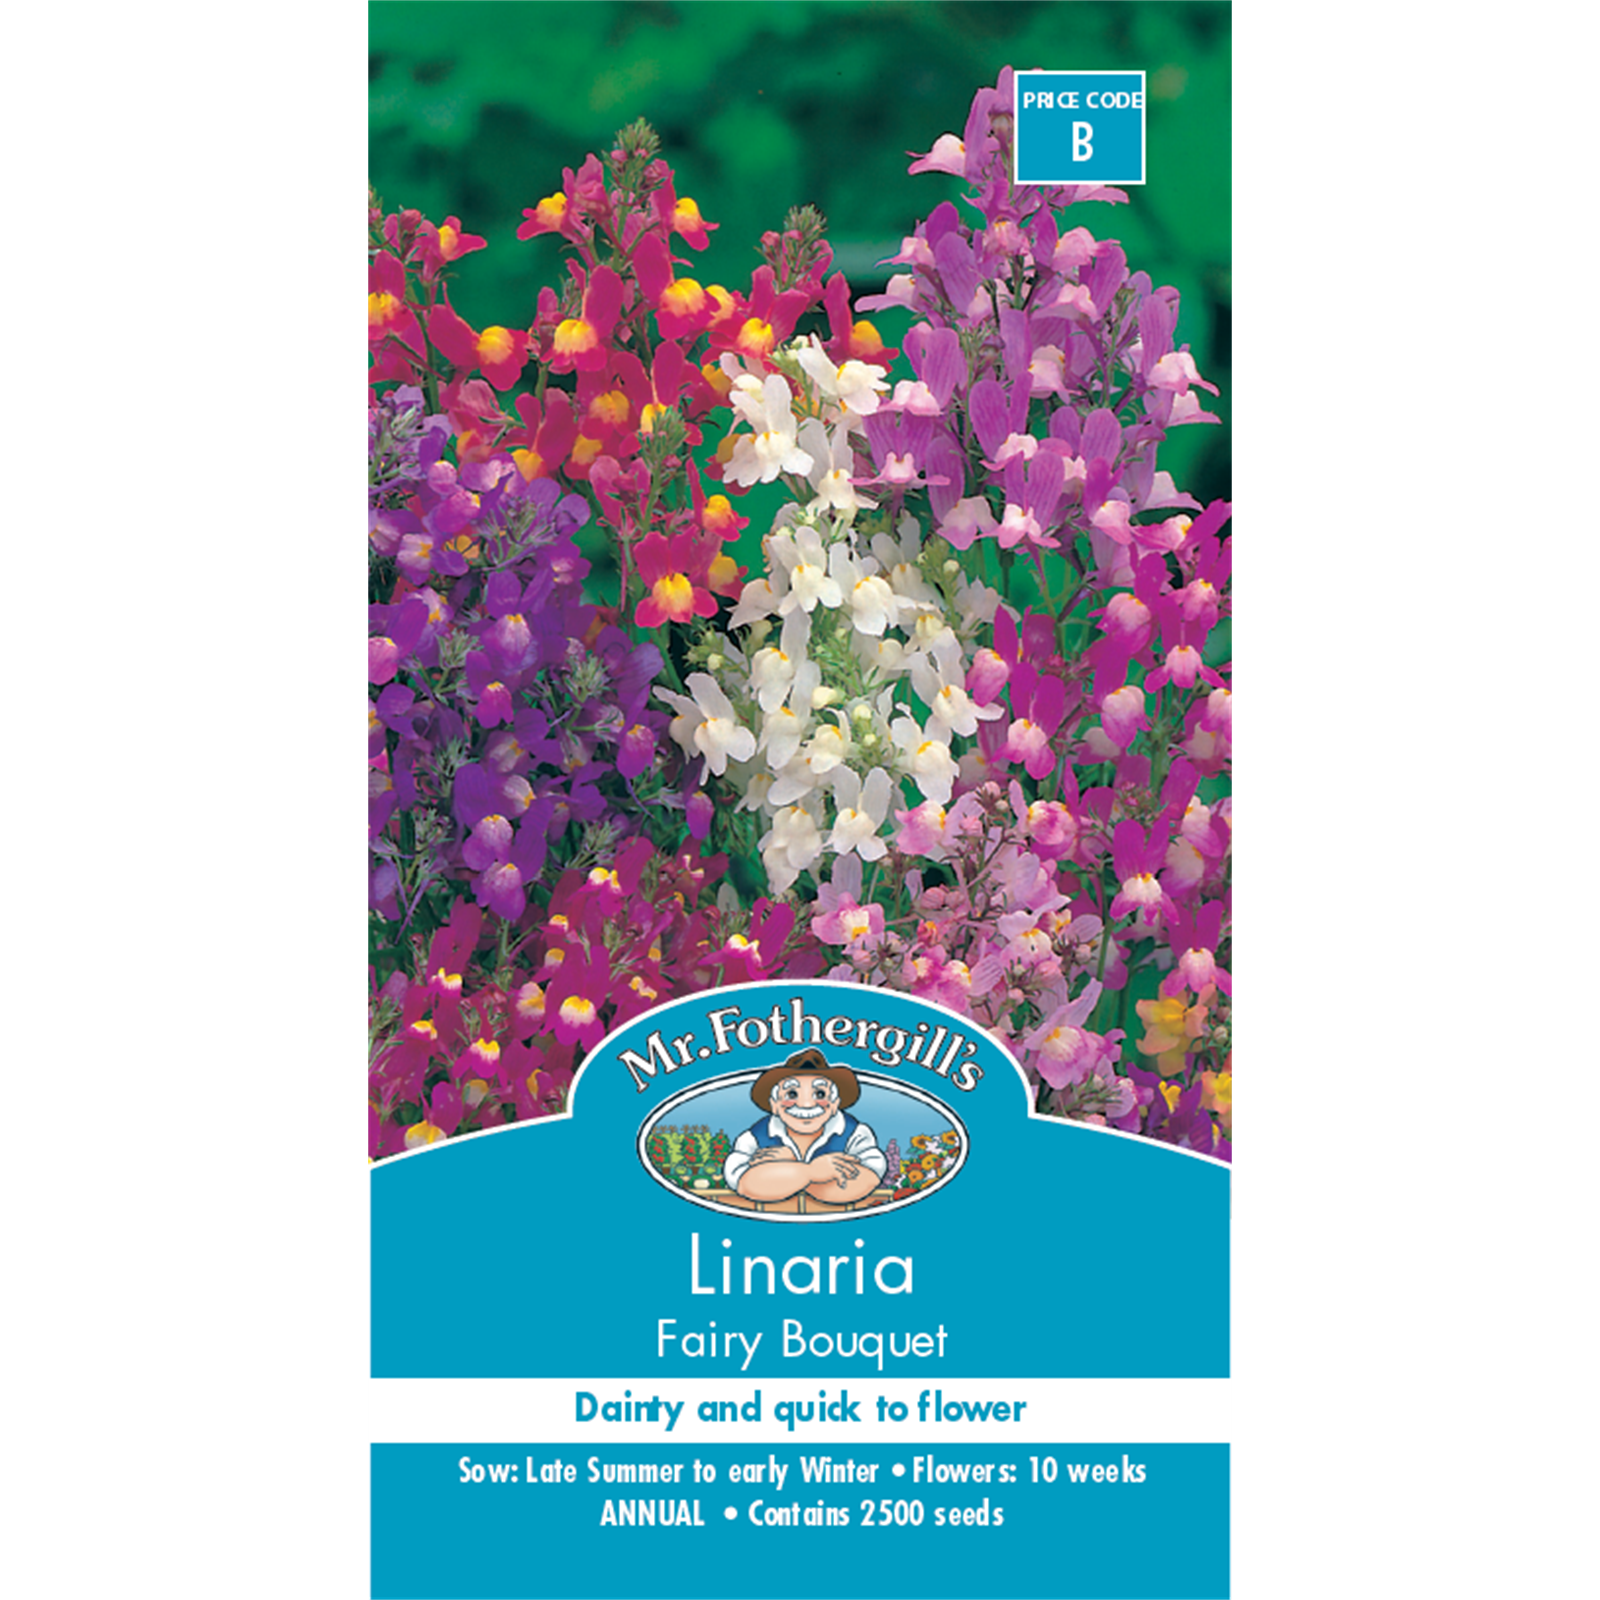 Mr Fothergill's Linaria Fairy Bouquet Flower Seeds